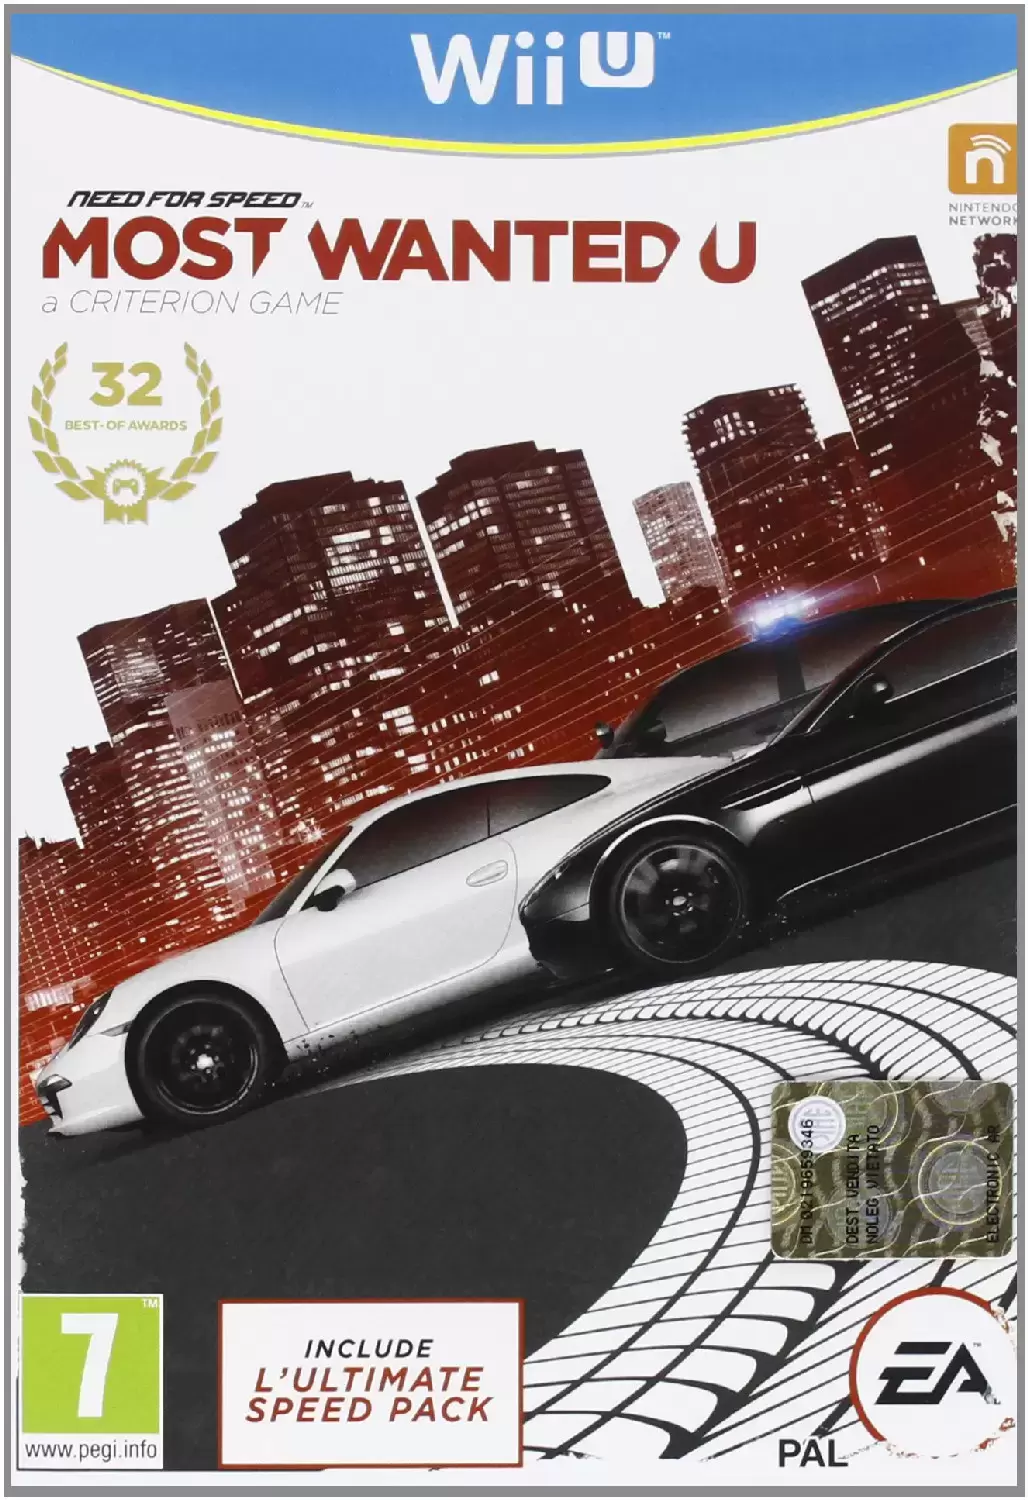 Wii U Games - Need For Speed Most Wanted